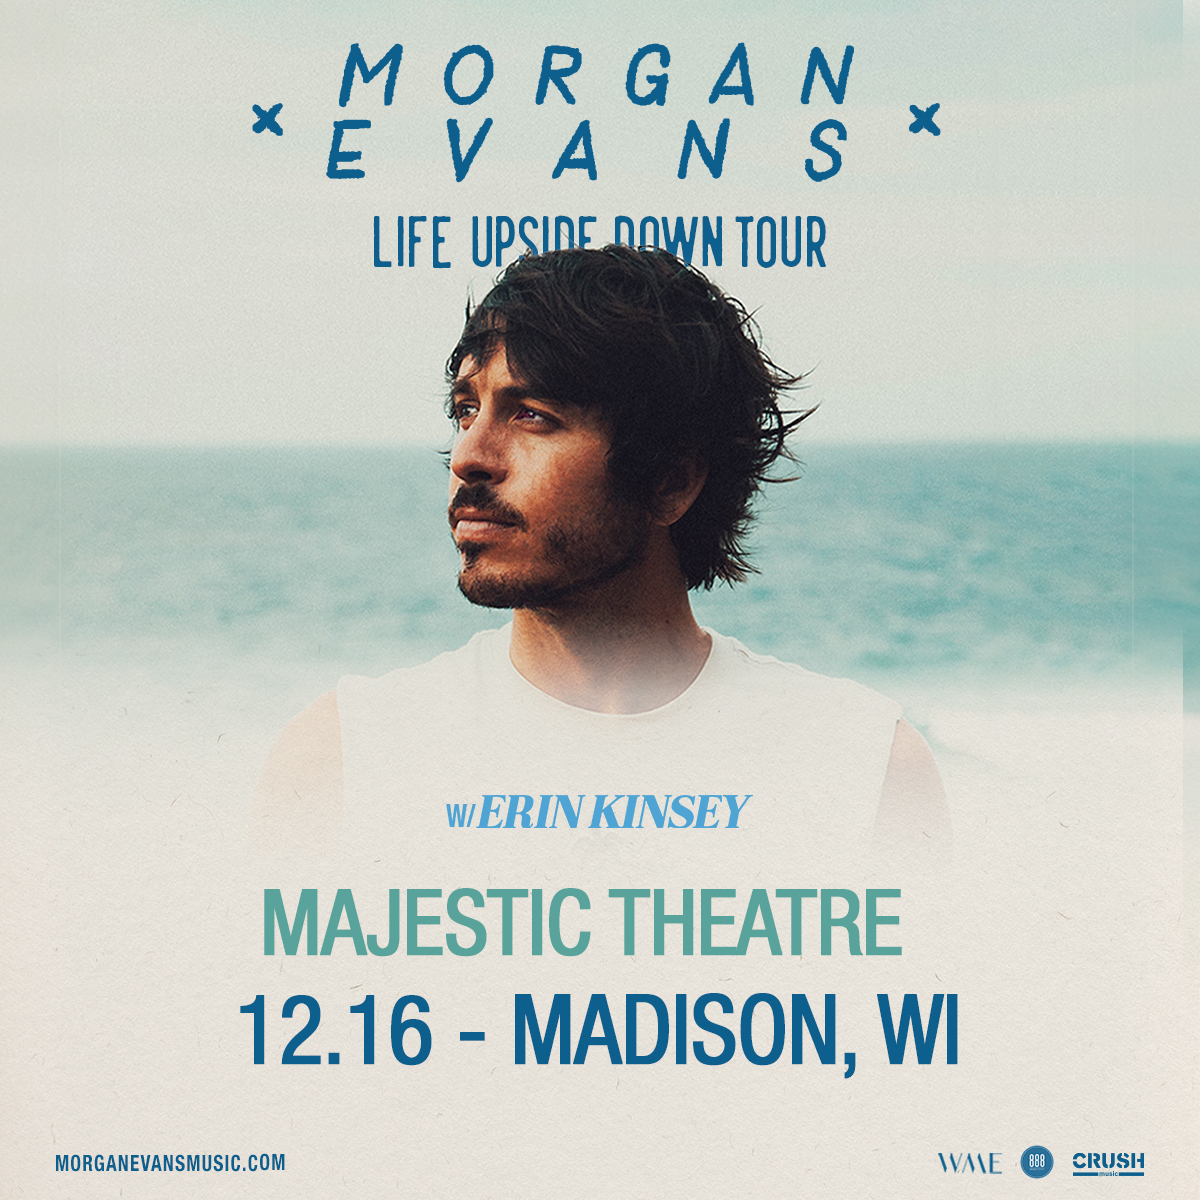 JUST ANNOUNCED! @Morgan_Evans brings his 𝑳𝒊𝒇𝒆 𝑼𝒑𝒔𝒊𝒅𝒆 𝑫𝒐𝒘𝒏 𝑻𝒐𝒖𝒓 to Madison on 12/16 with @ErinKinseyTX ✨ Snag tix early using code 𝗨𝗽𝘀𝗶𝗱𝗲𝗗𝗼𝘄𝗻 tomorrow at 10AM! On sale Thursday at 11AM @ bit.ly/MorganEvansMad… 🎟